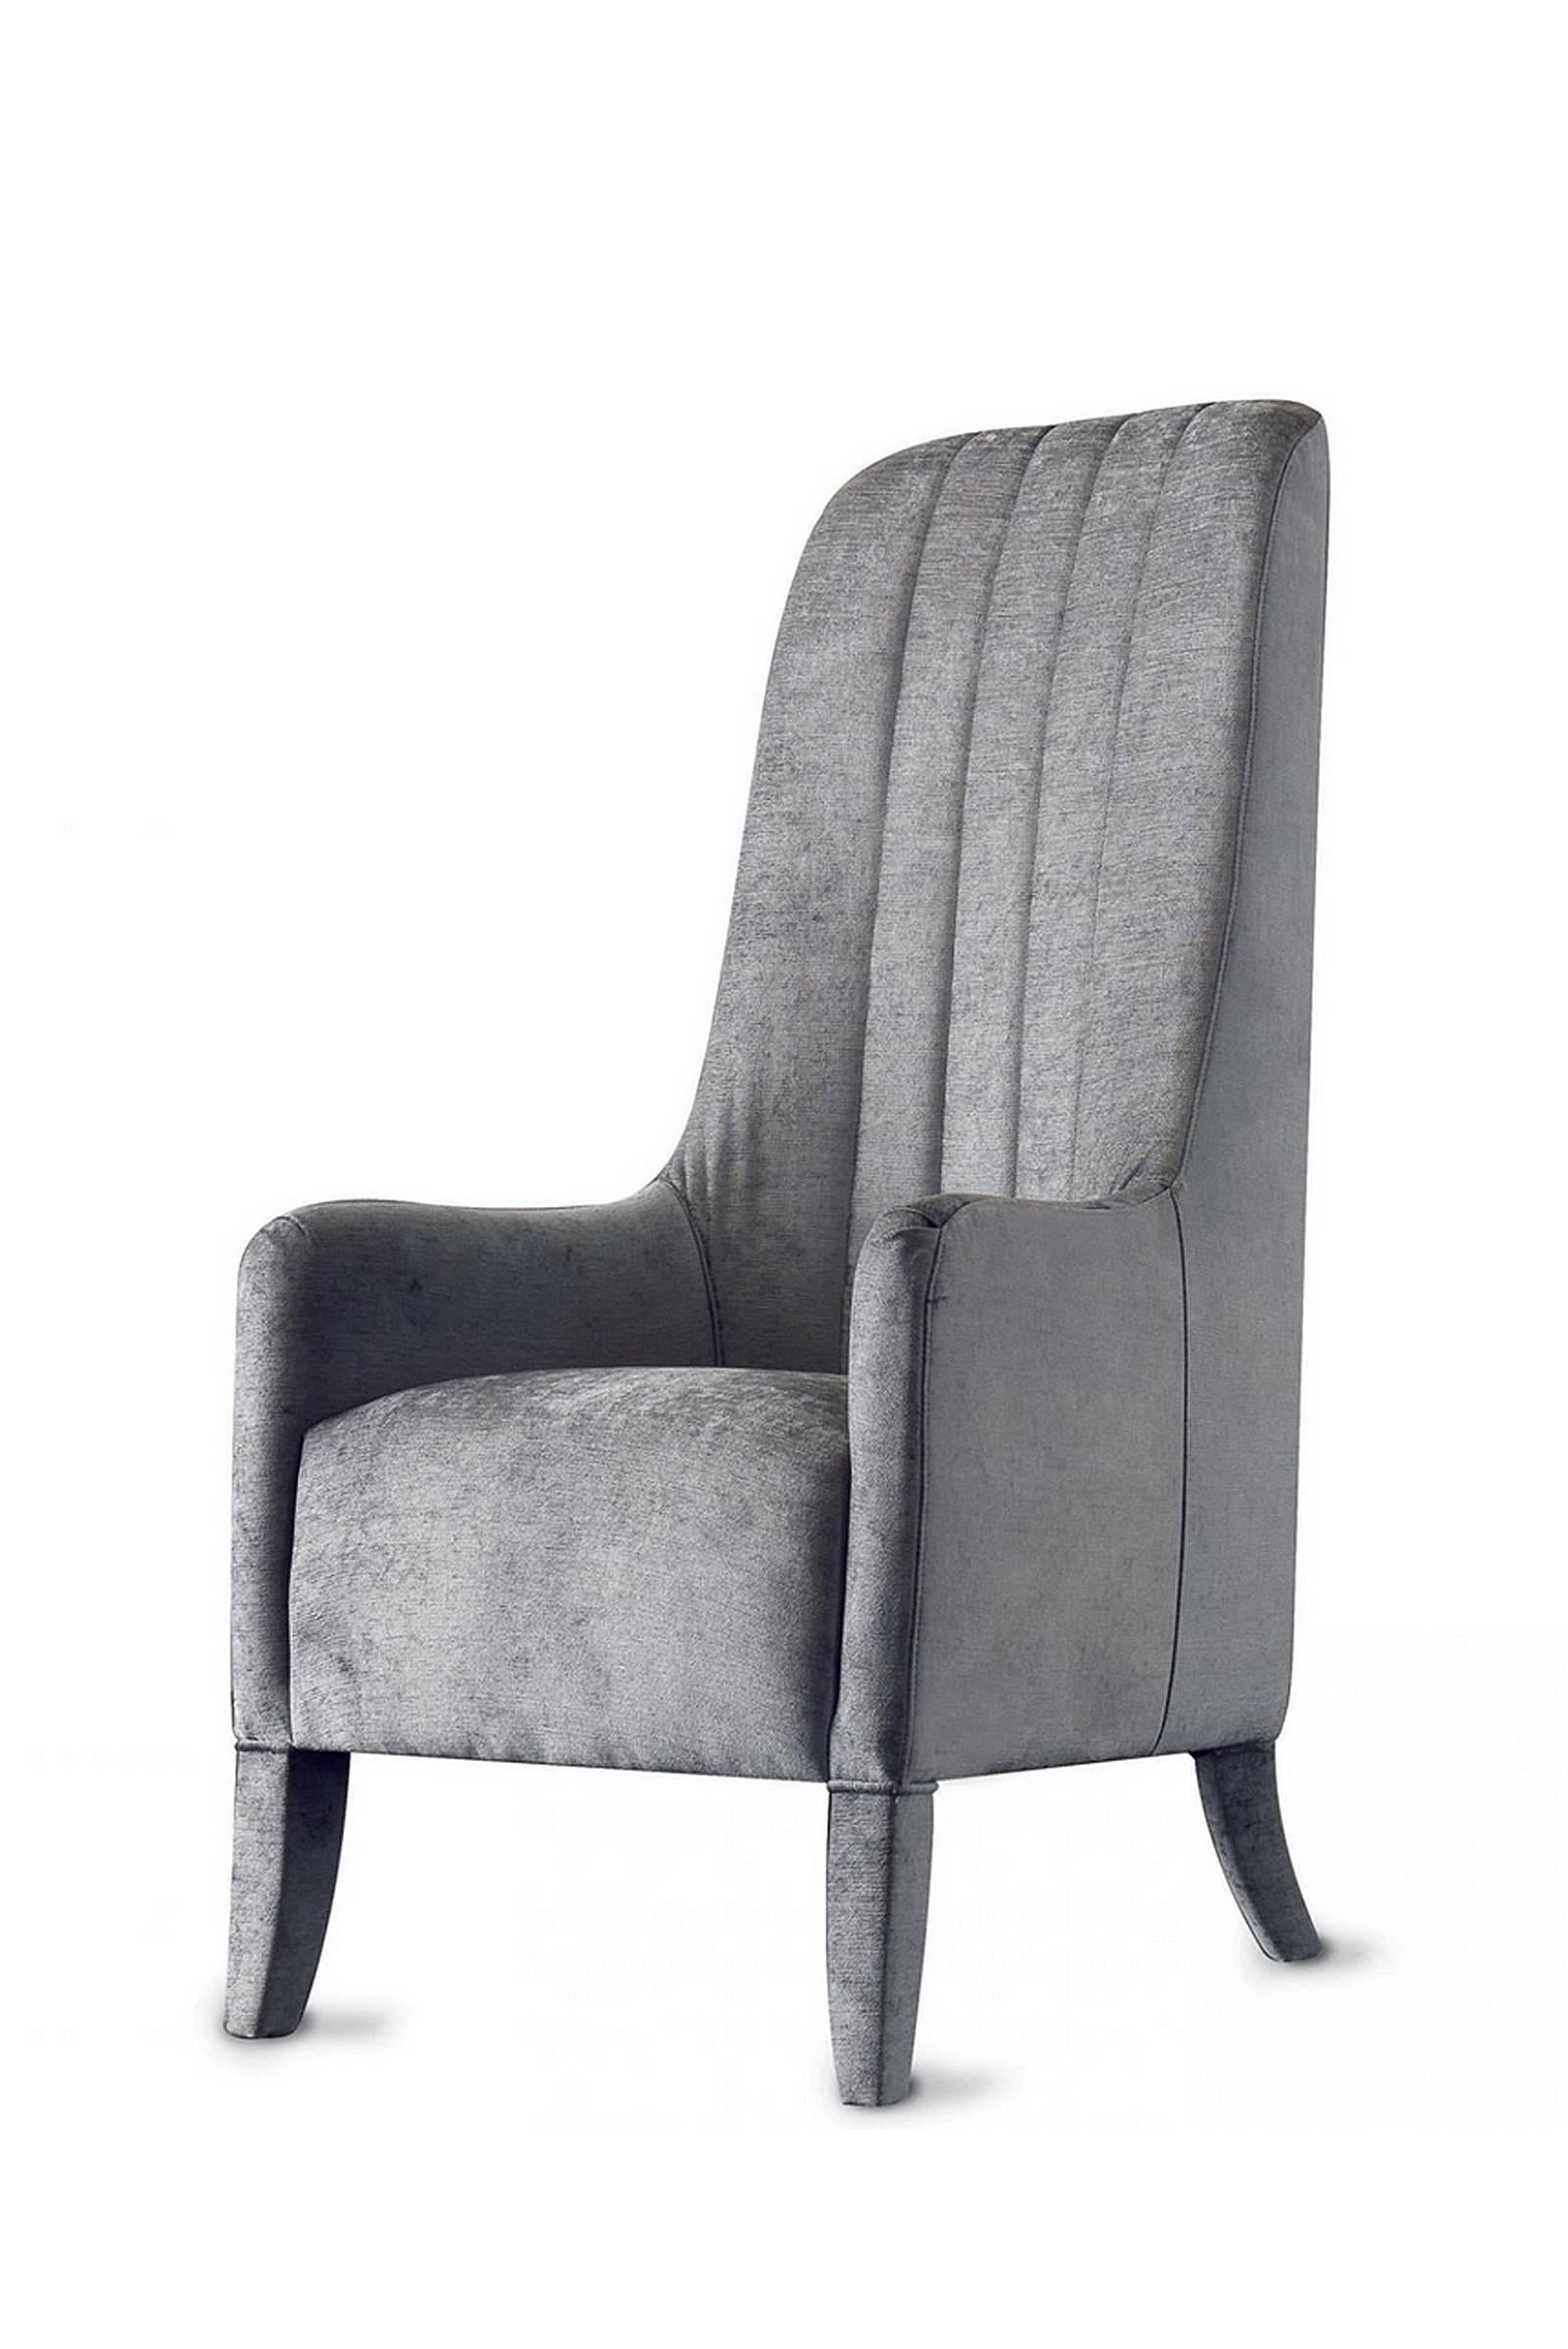 Contemporary Ramses Armchair in Fabric with Wood Structure For Sale